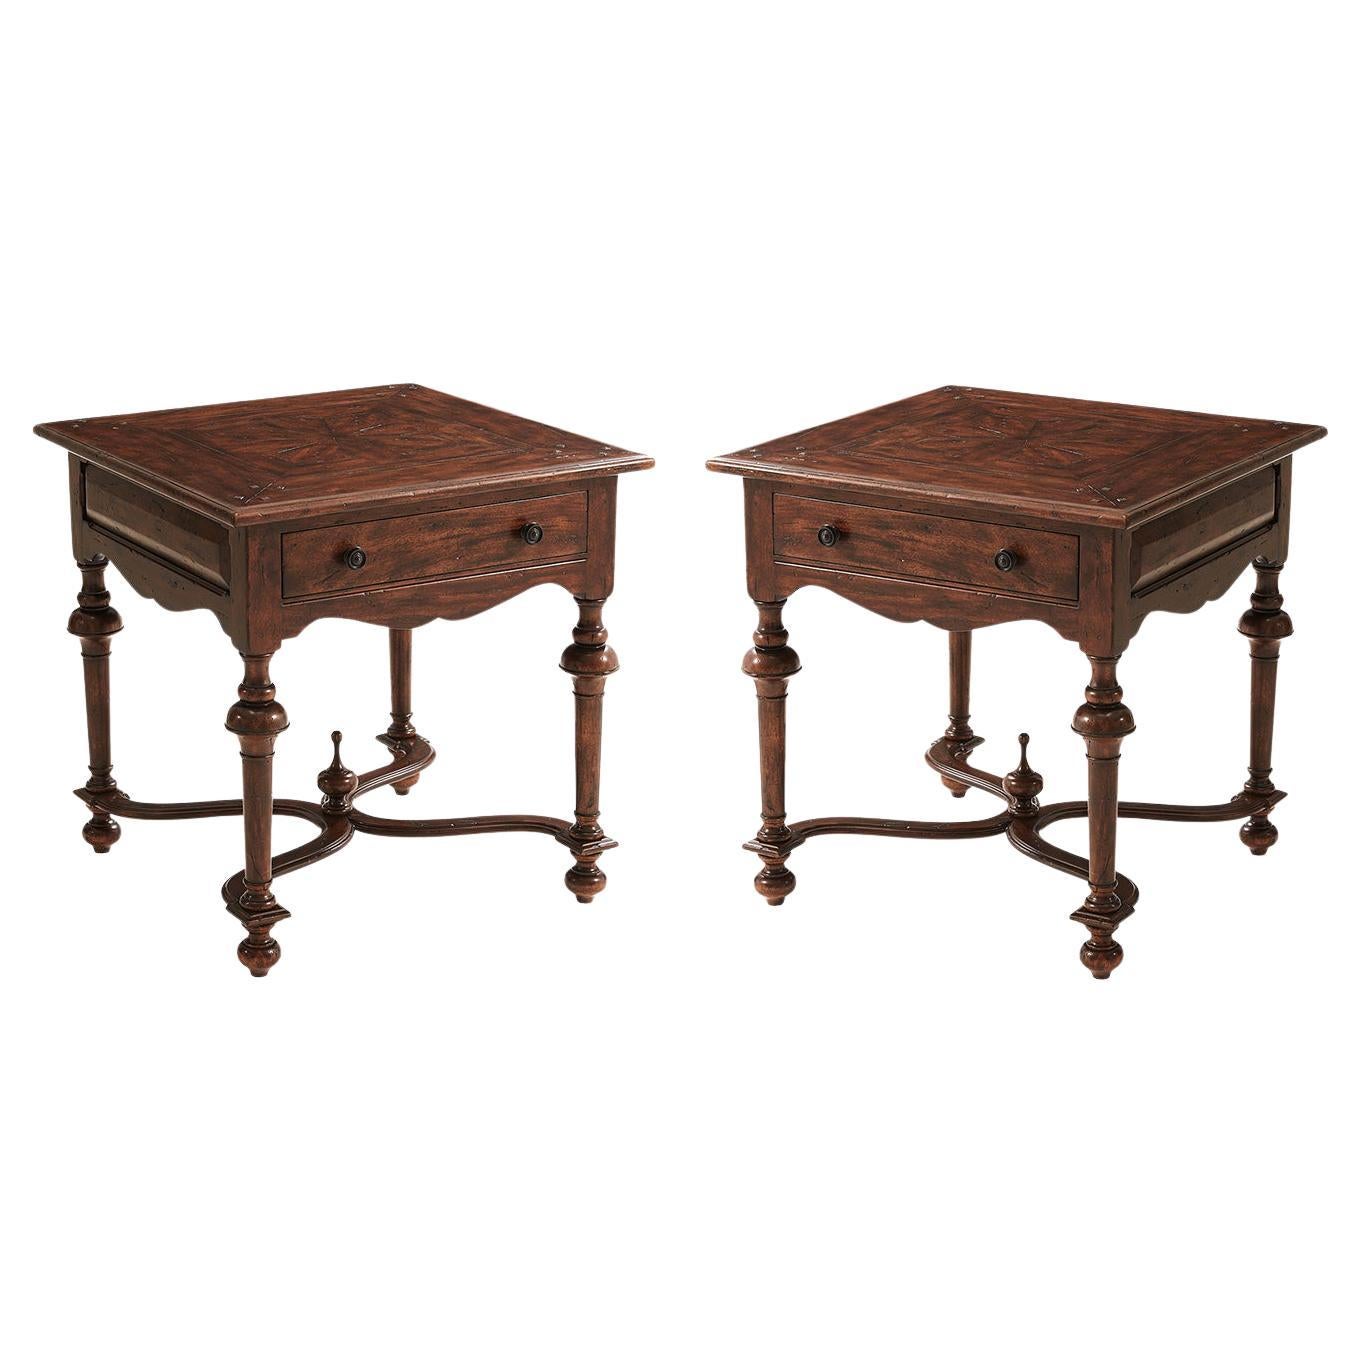 Pair of William and Mary Antiqued End Tables